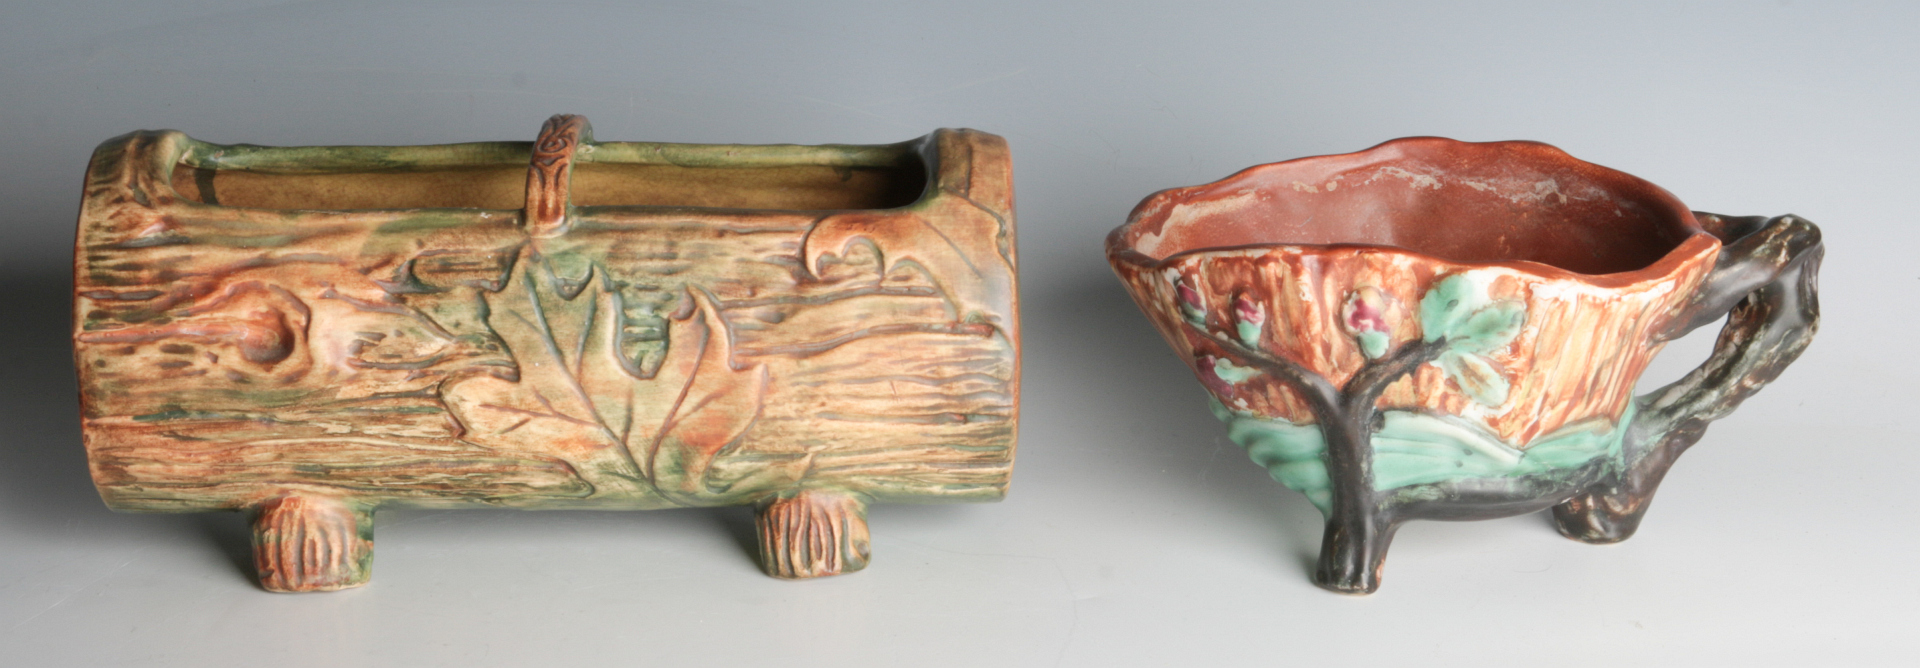 WELLER 'WOODCRAFT' AND 'WARWICK' POTTERY PLANTERS